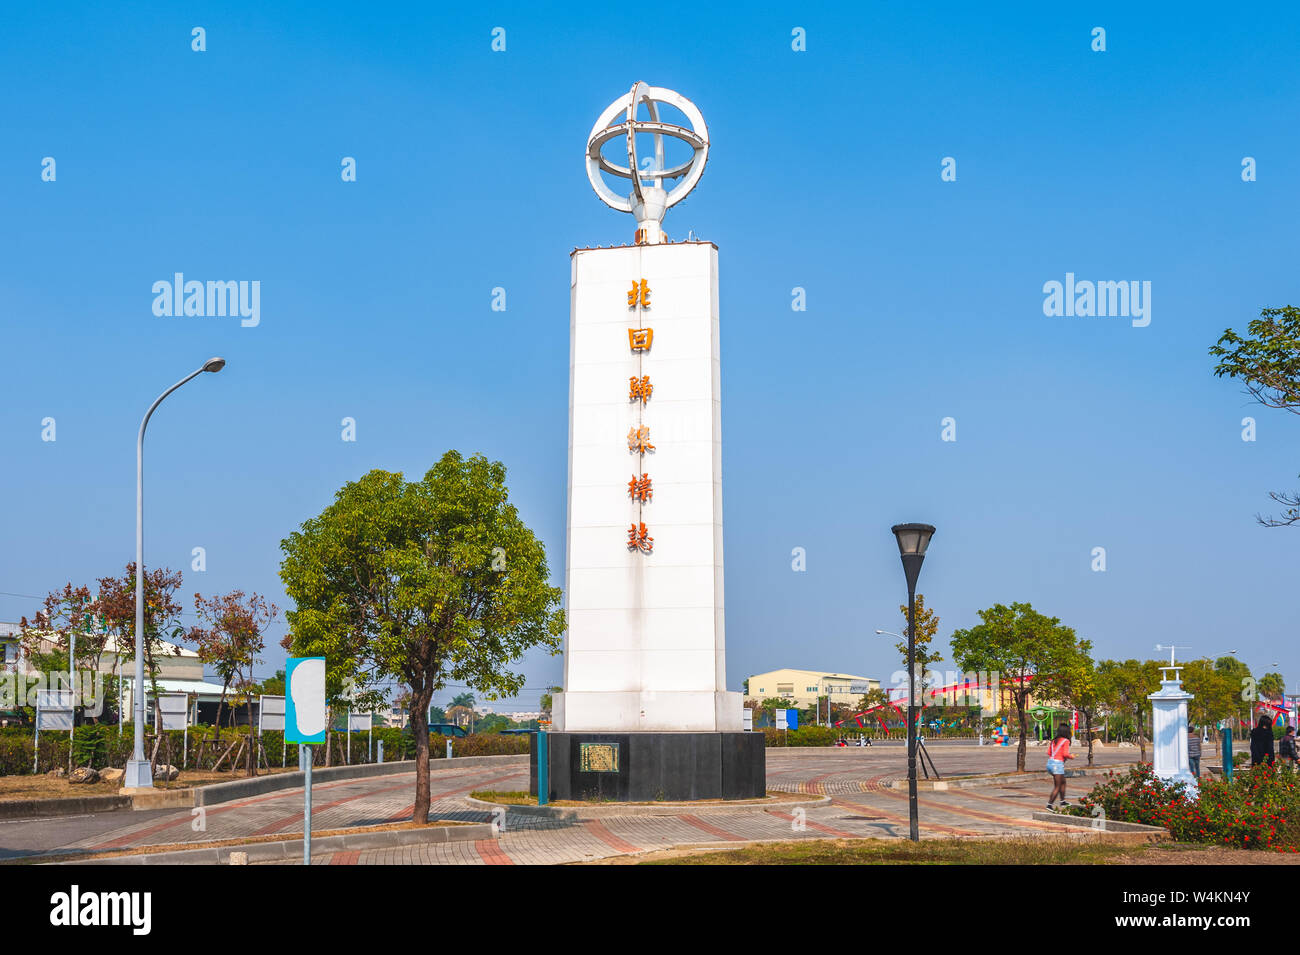 The Tropic of Cancer Marker at Chiayi, Taiwan Stock Photo